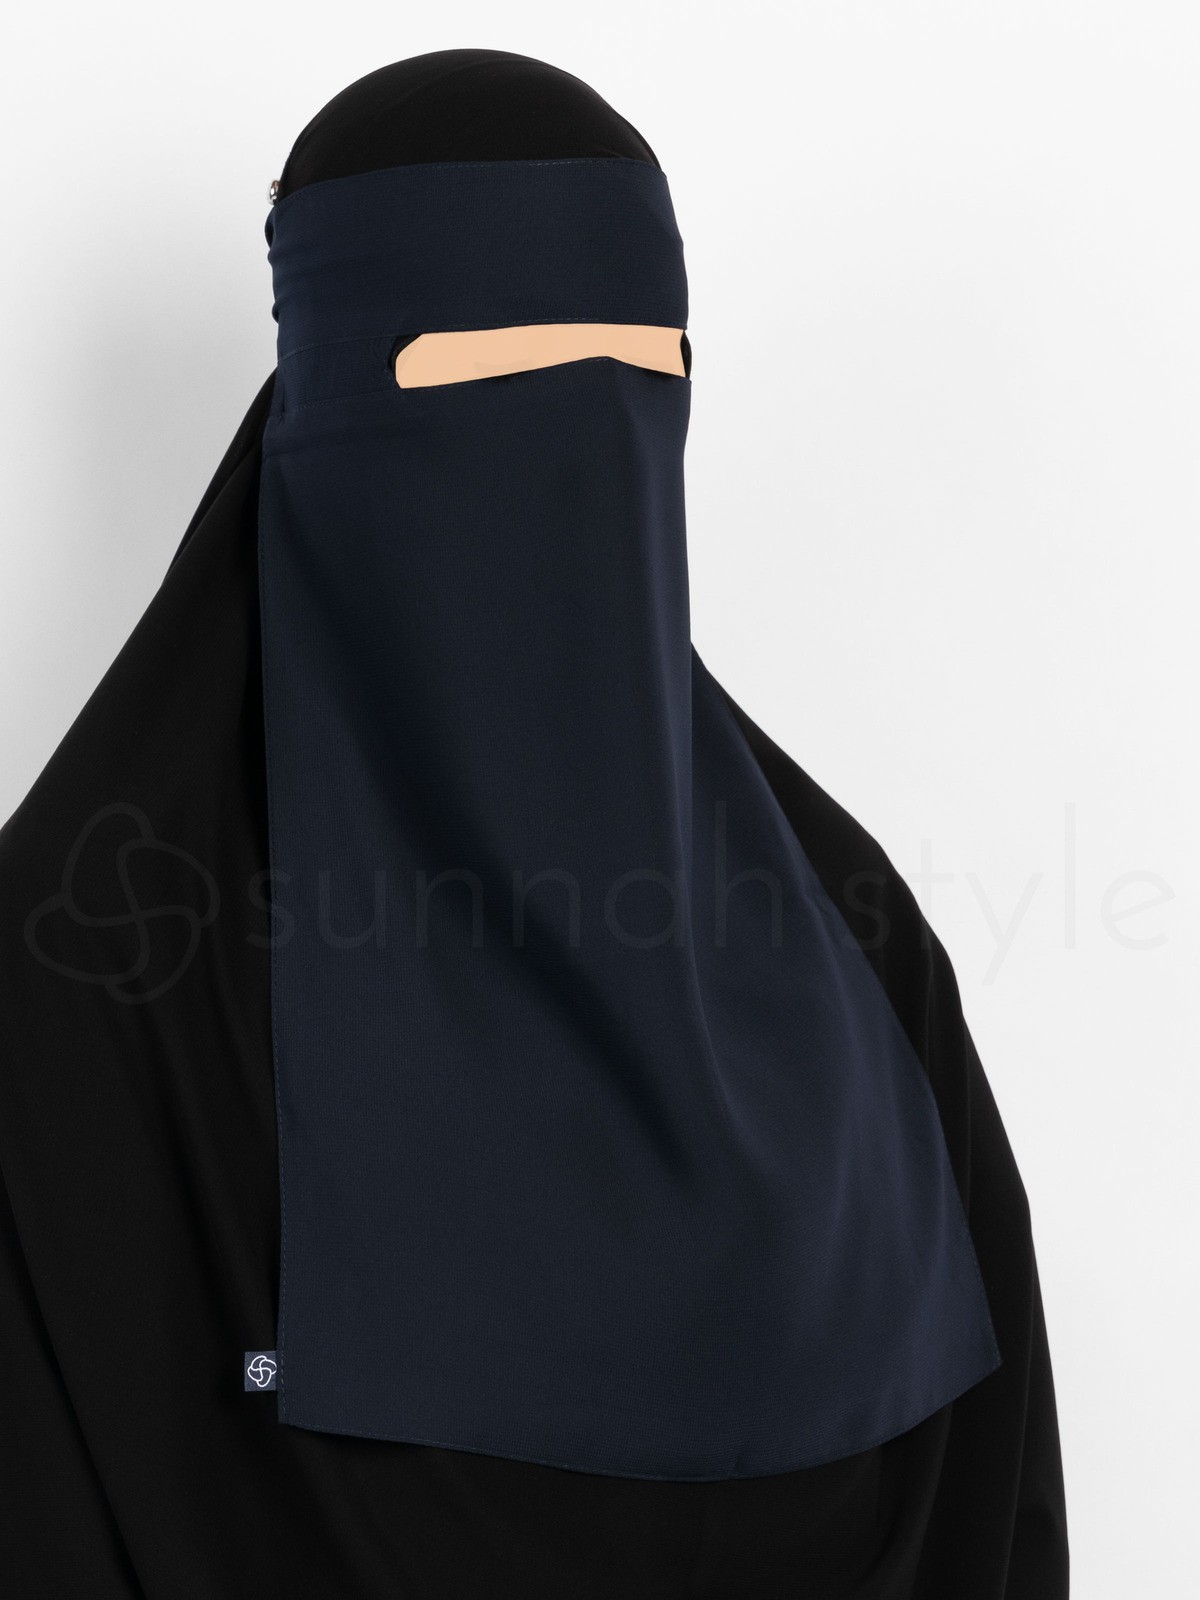 Sunnah Style - No-Pinch One Layer Niqab (Navy Blue)